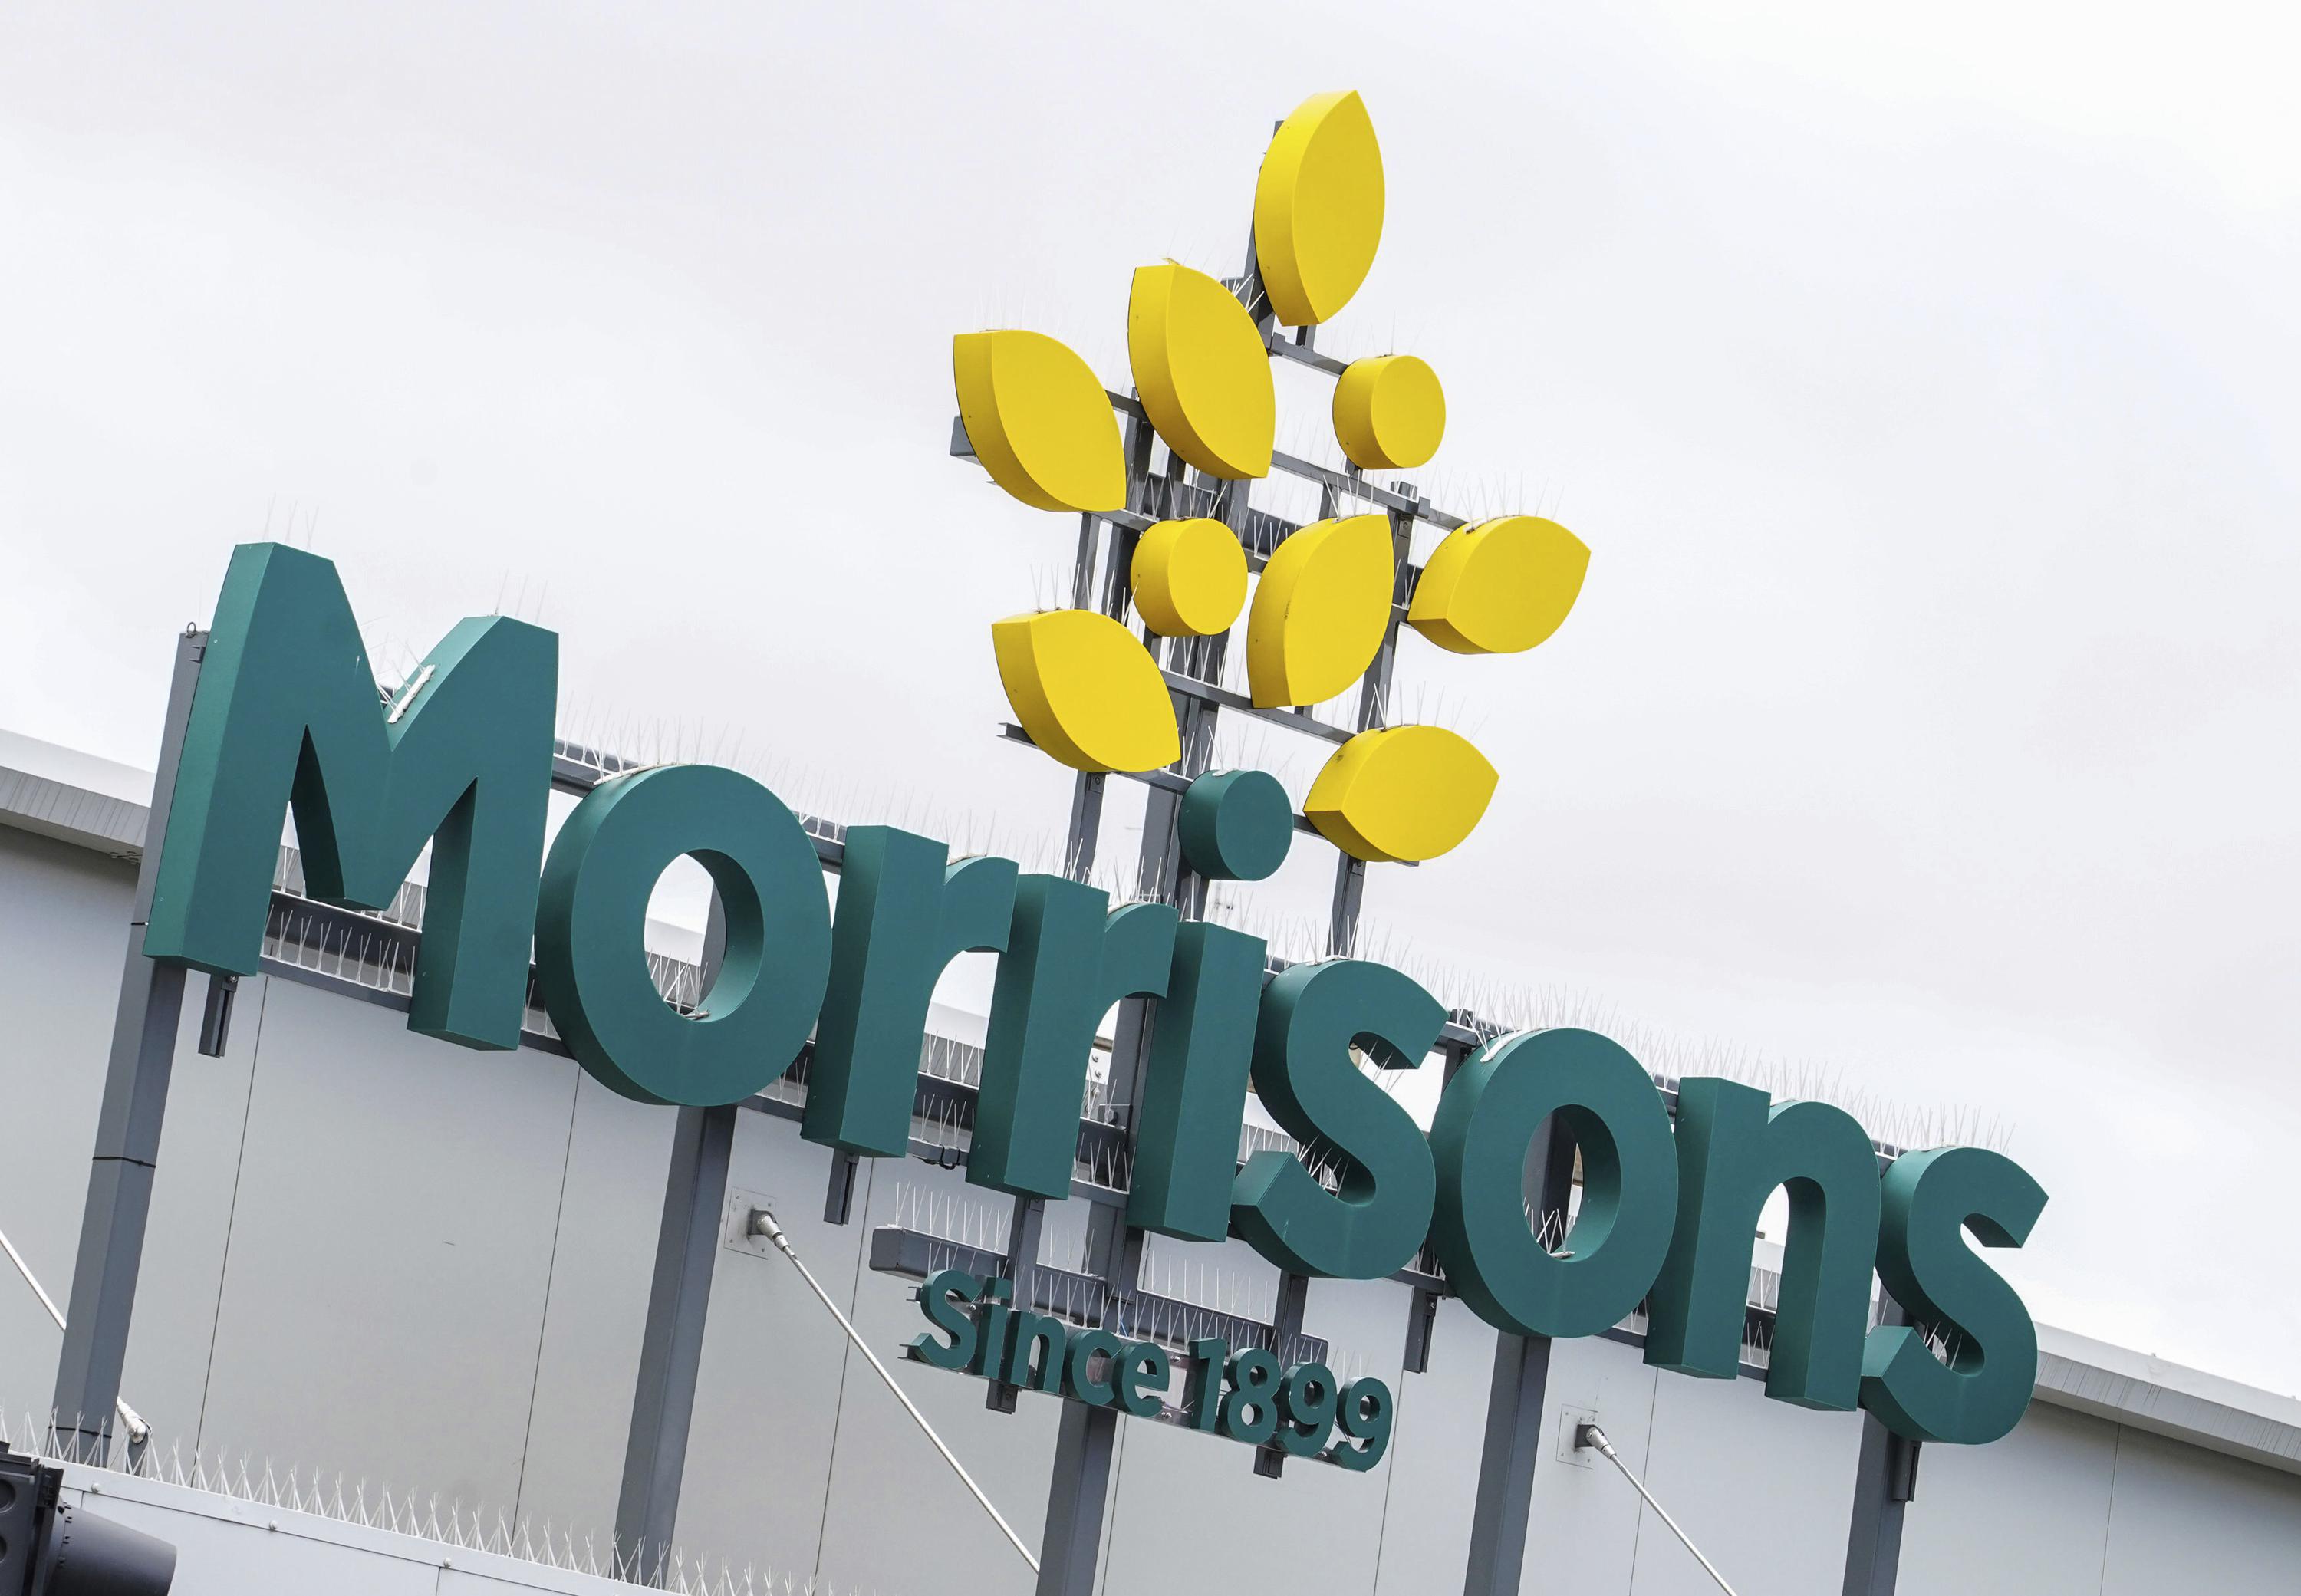 American Private Equity Group Wins Battle To Buy Morrisons For Almost USD 10 Billion